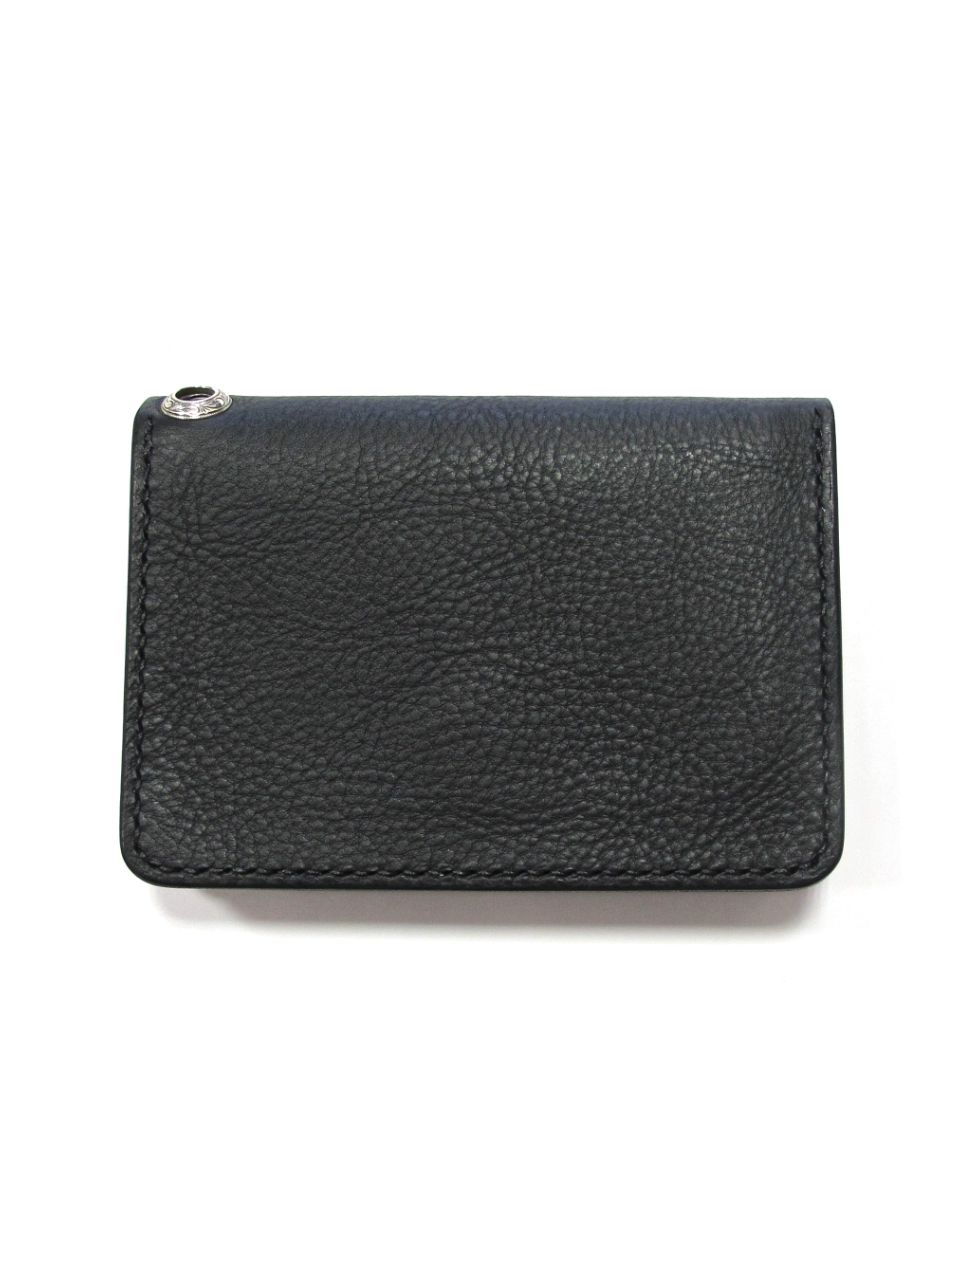 ANTIDOTE BUYERS CLUB - 【ラスト1点】COMPACT TRUCKER WALLET (BLACK SMOOTH LEATHER)  / コンパクトトラッカーウォレット | LOOPHOLE